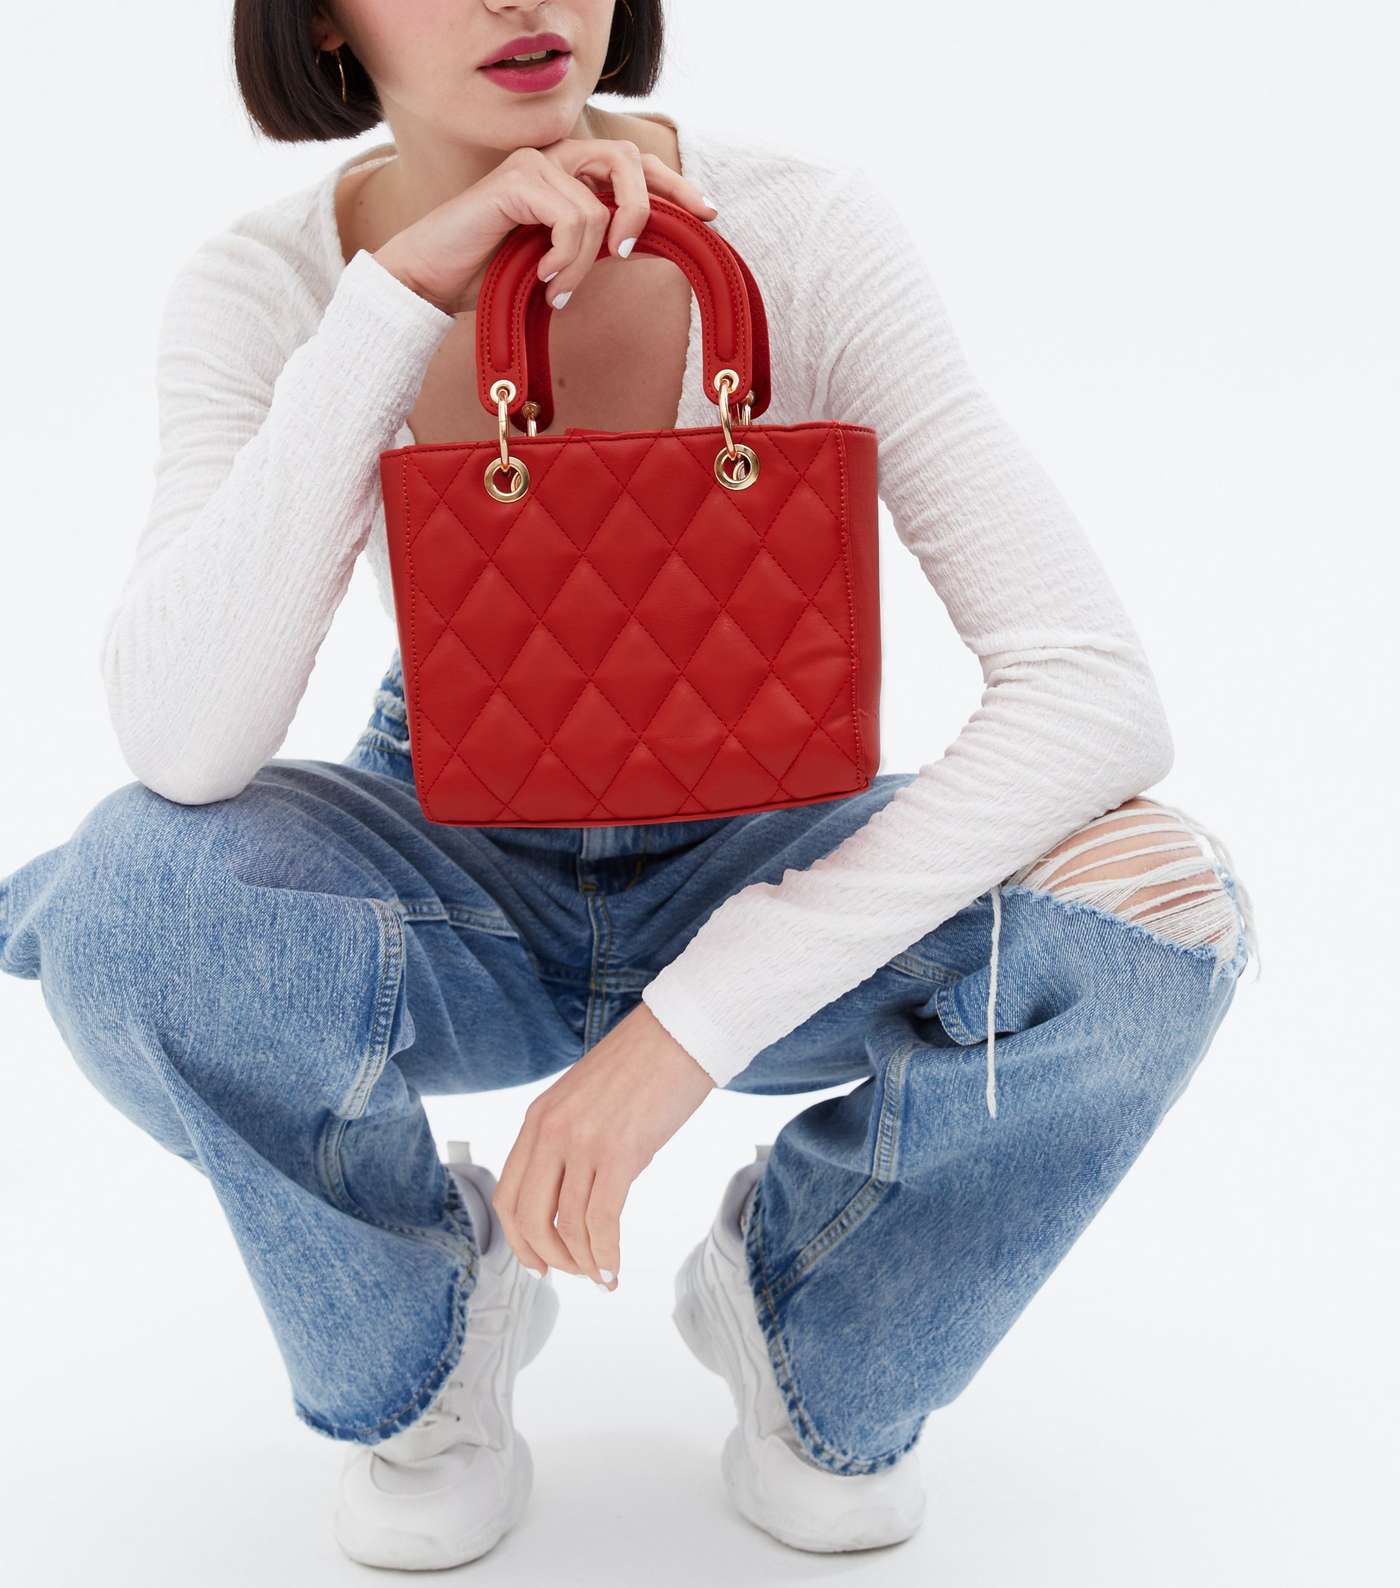 Red Quilted Leather-Look Cross Body Bag Image 2